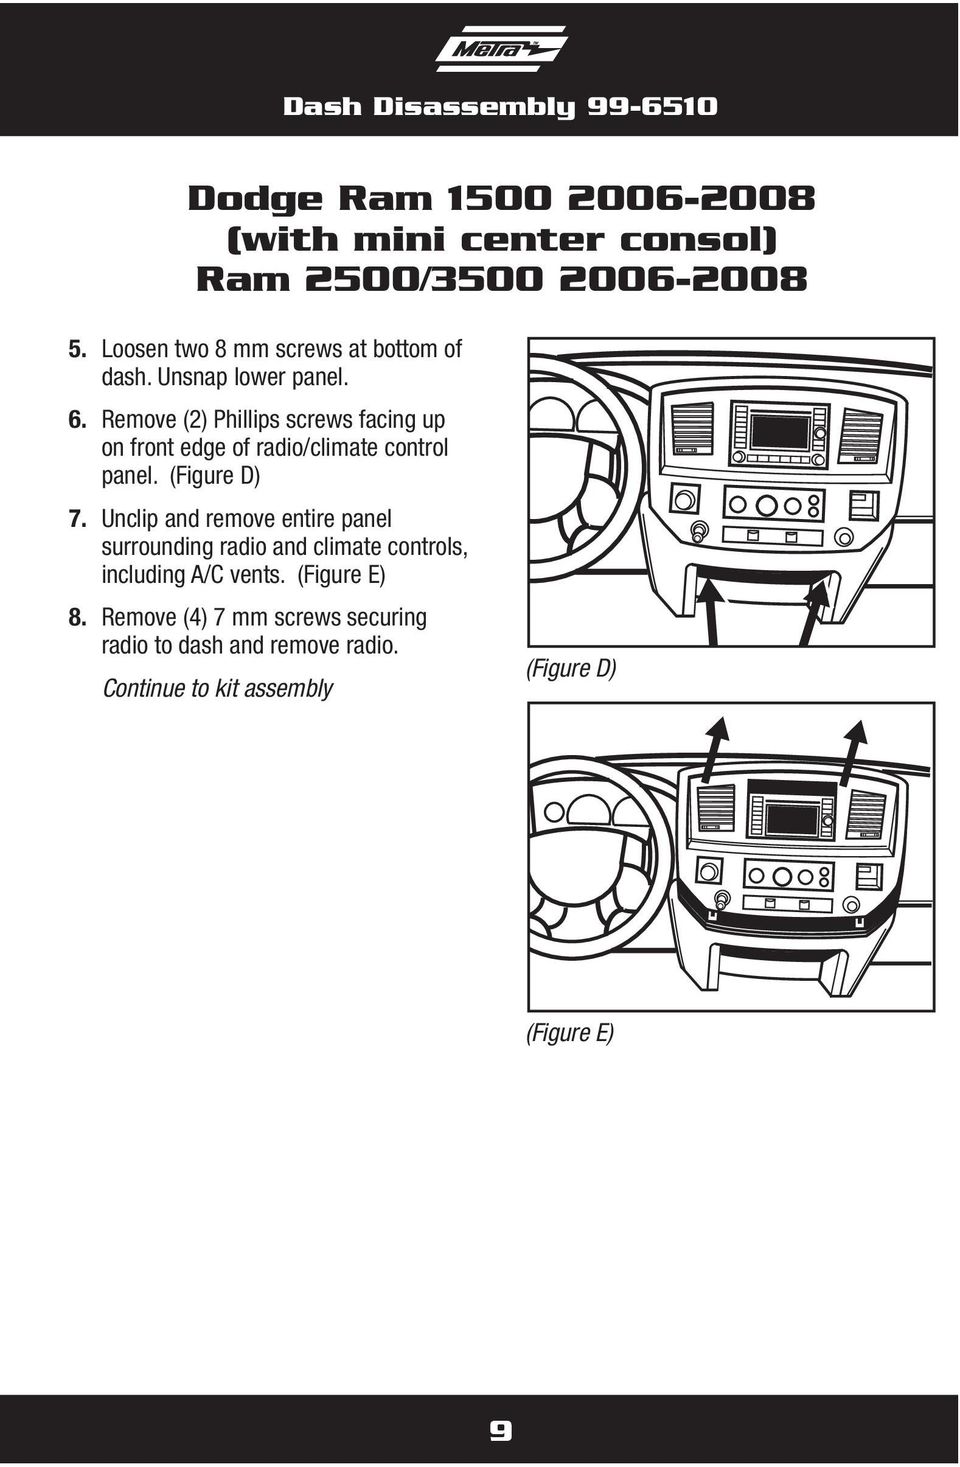 Remove (2) Phillips screws facing up on front edge of radio/climate control panel. (Figure D) 7.